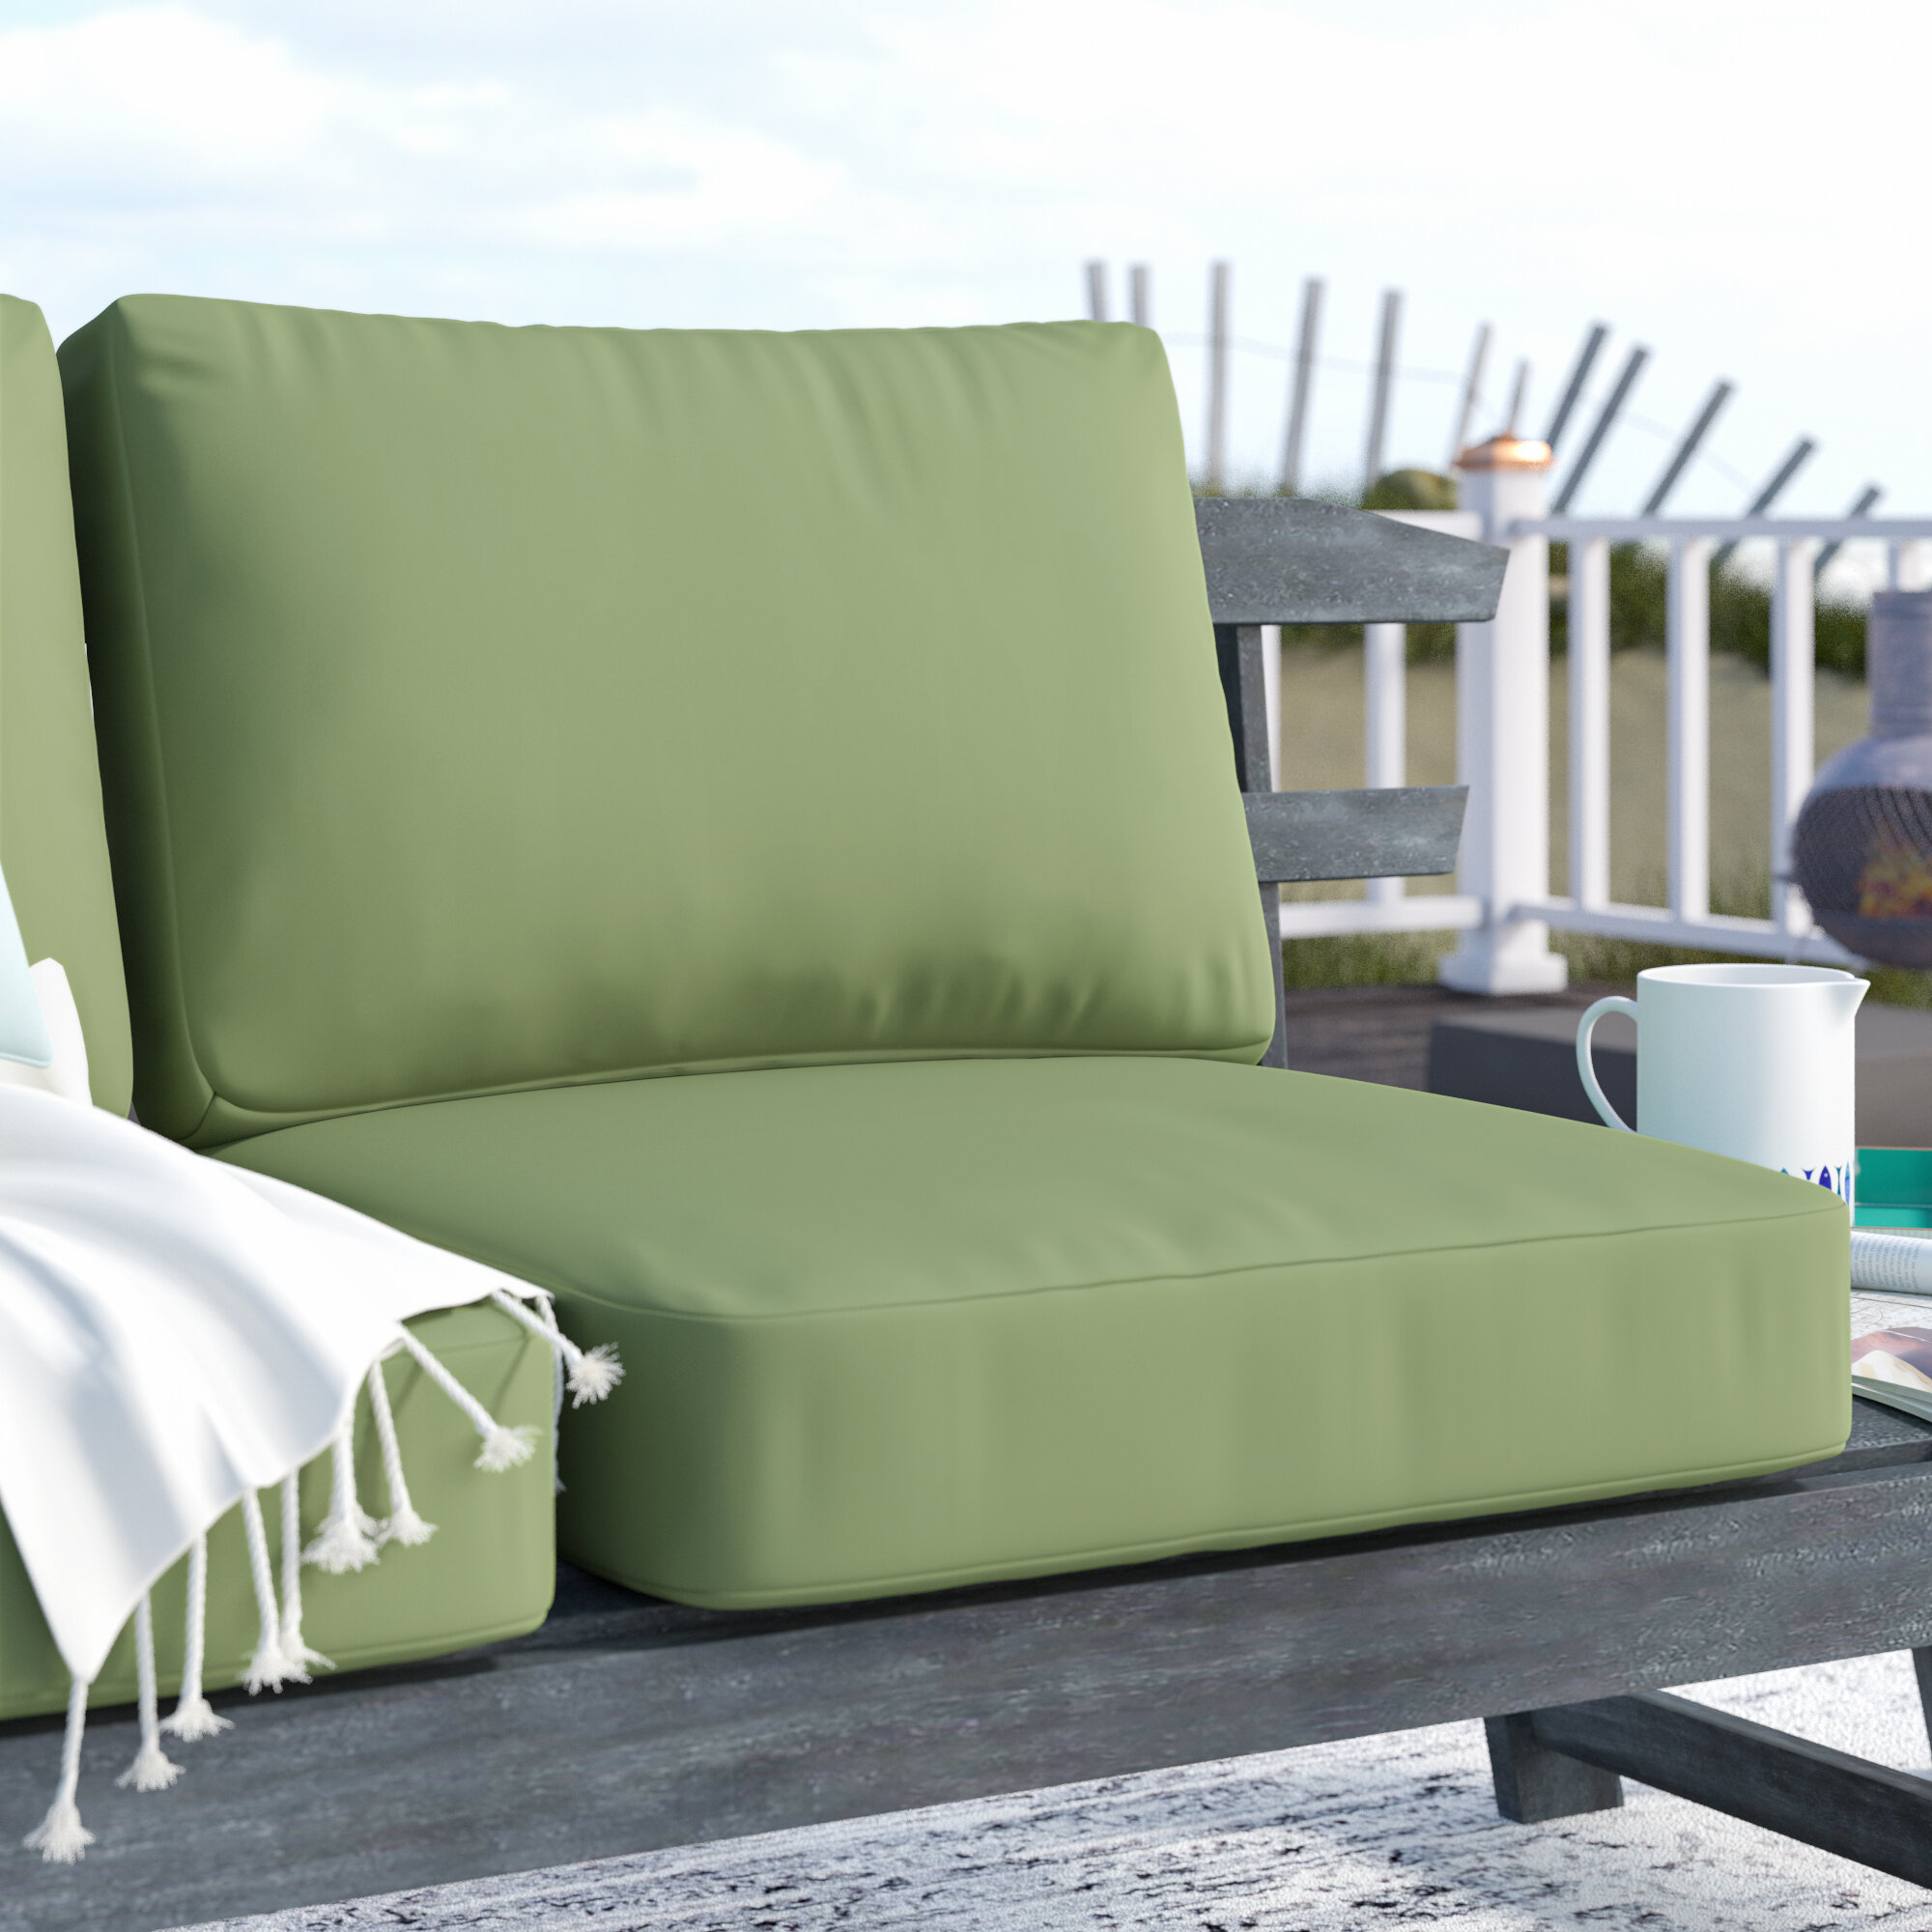 outdoor lounge chair pillows